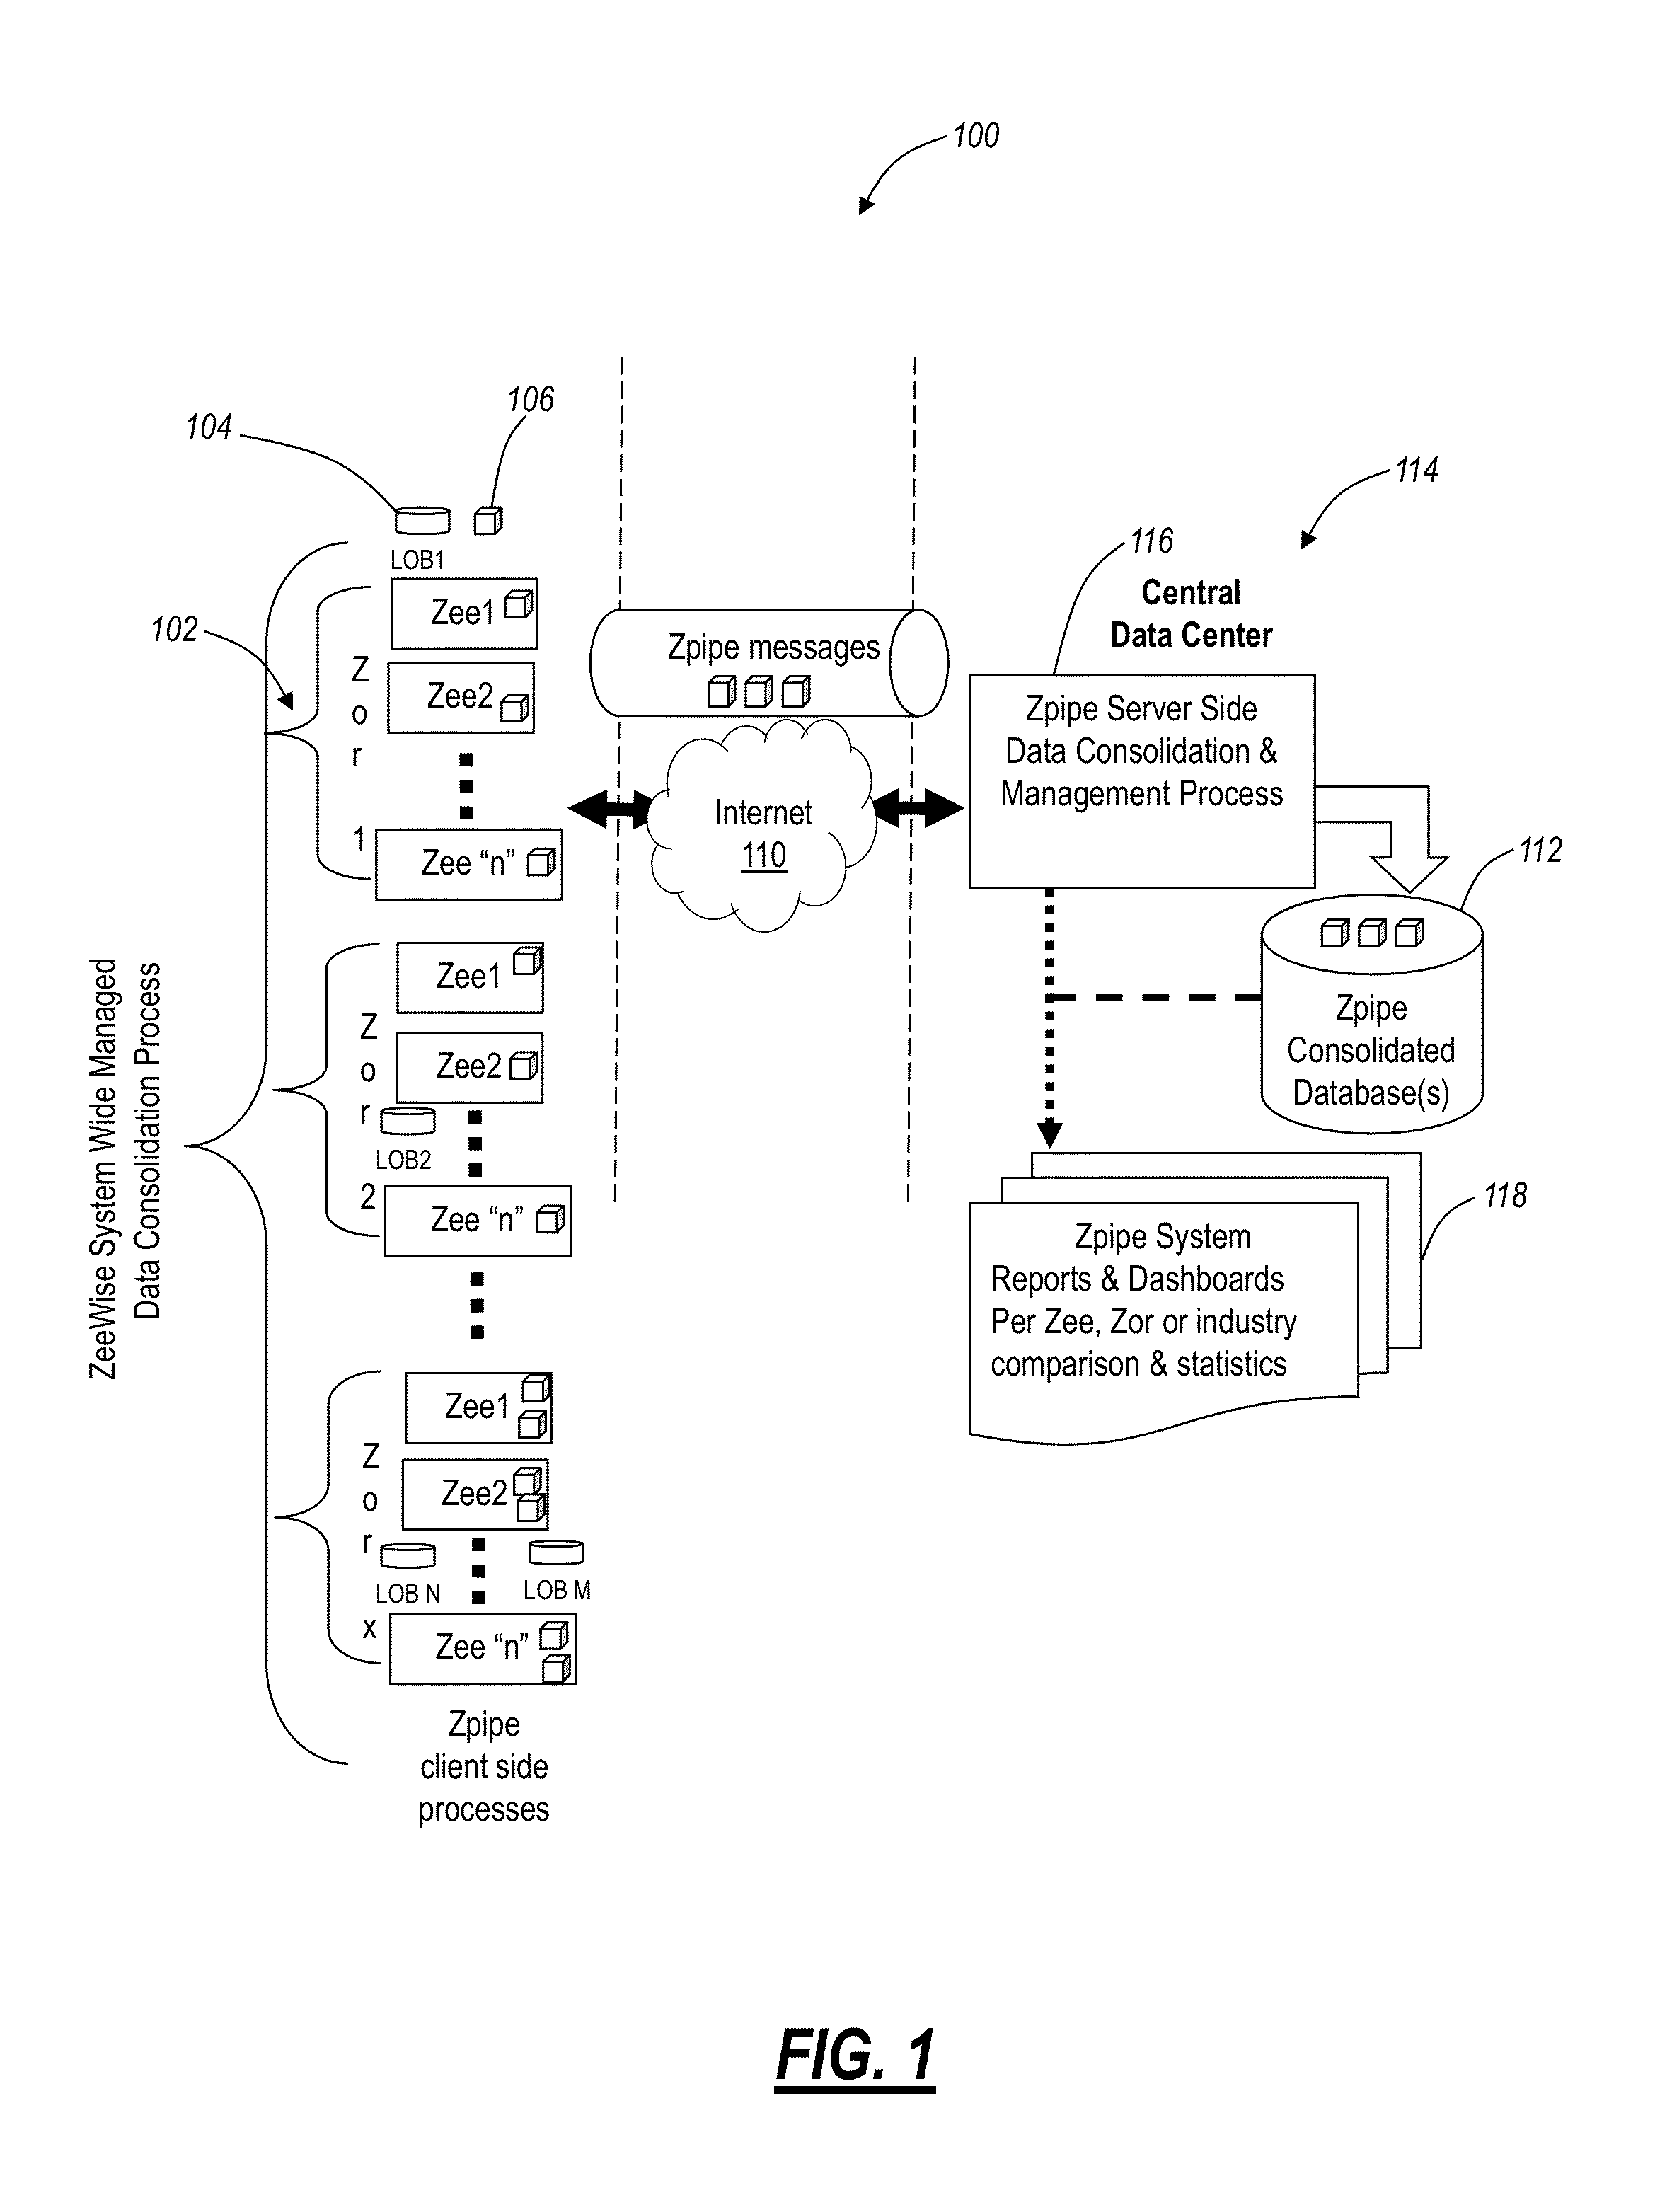 Systems and methods for collection and consolidation of heterogeneous  remote business data using dynamic data handling